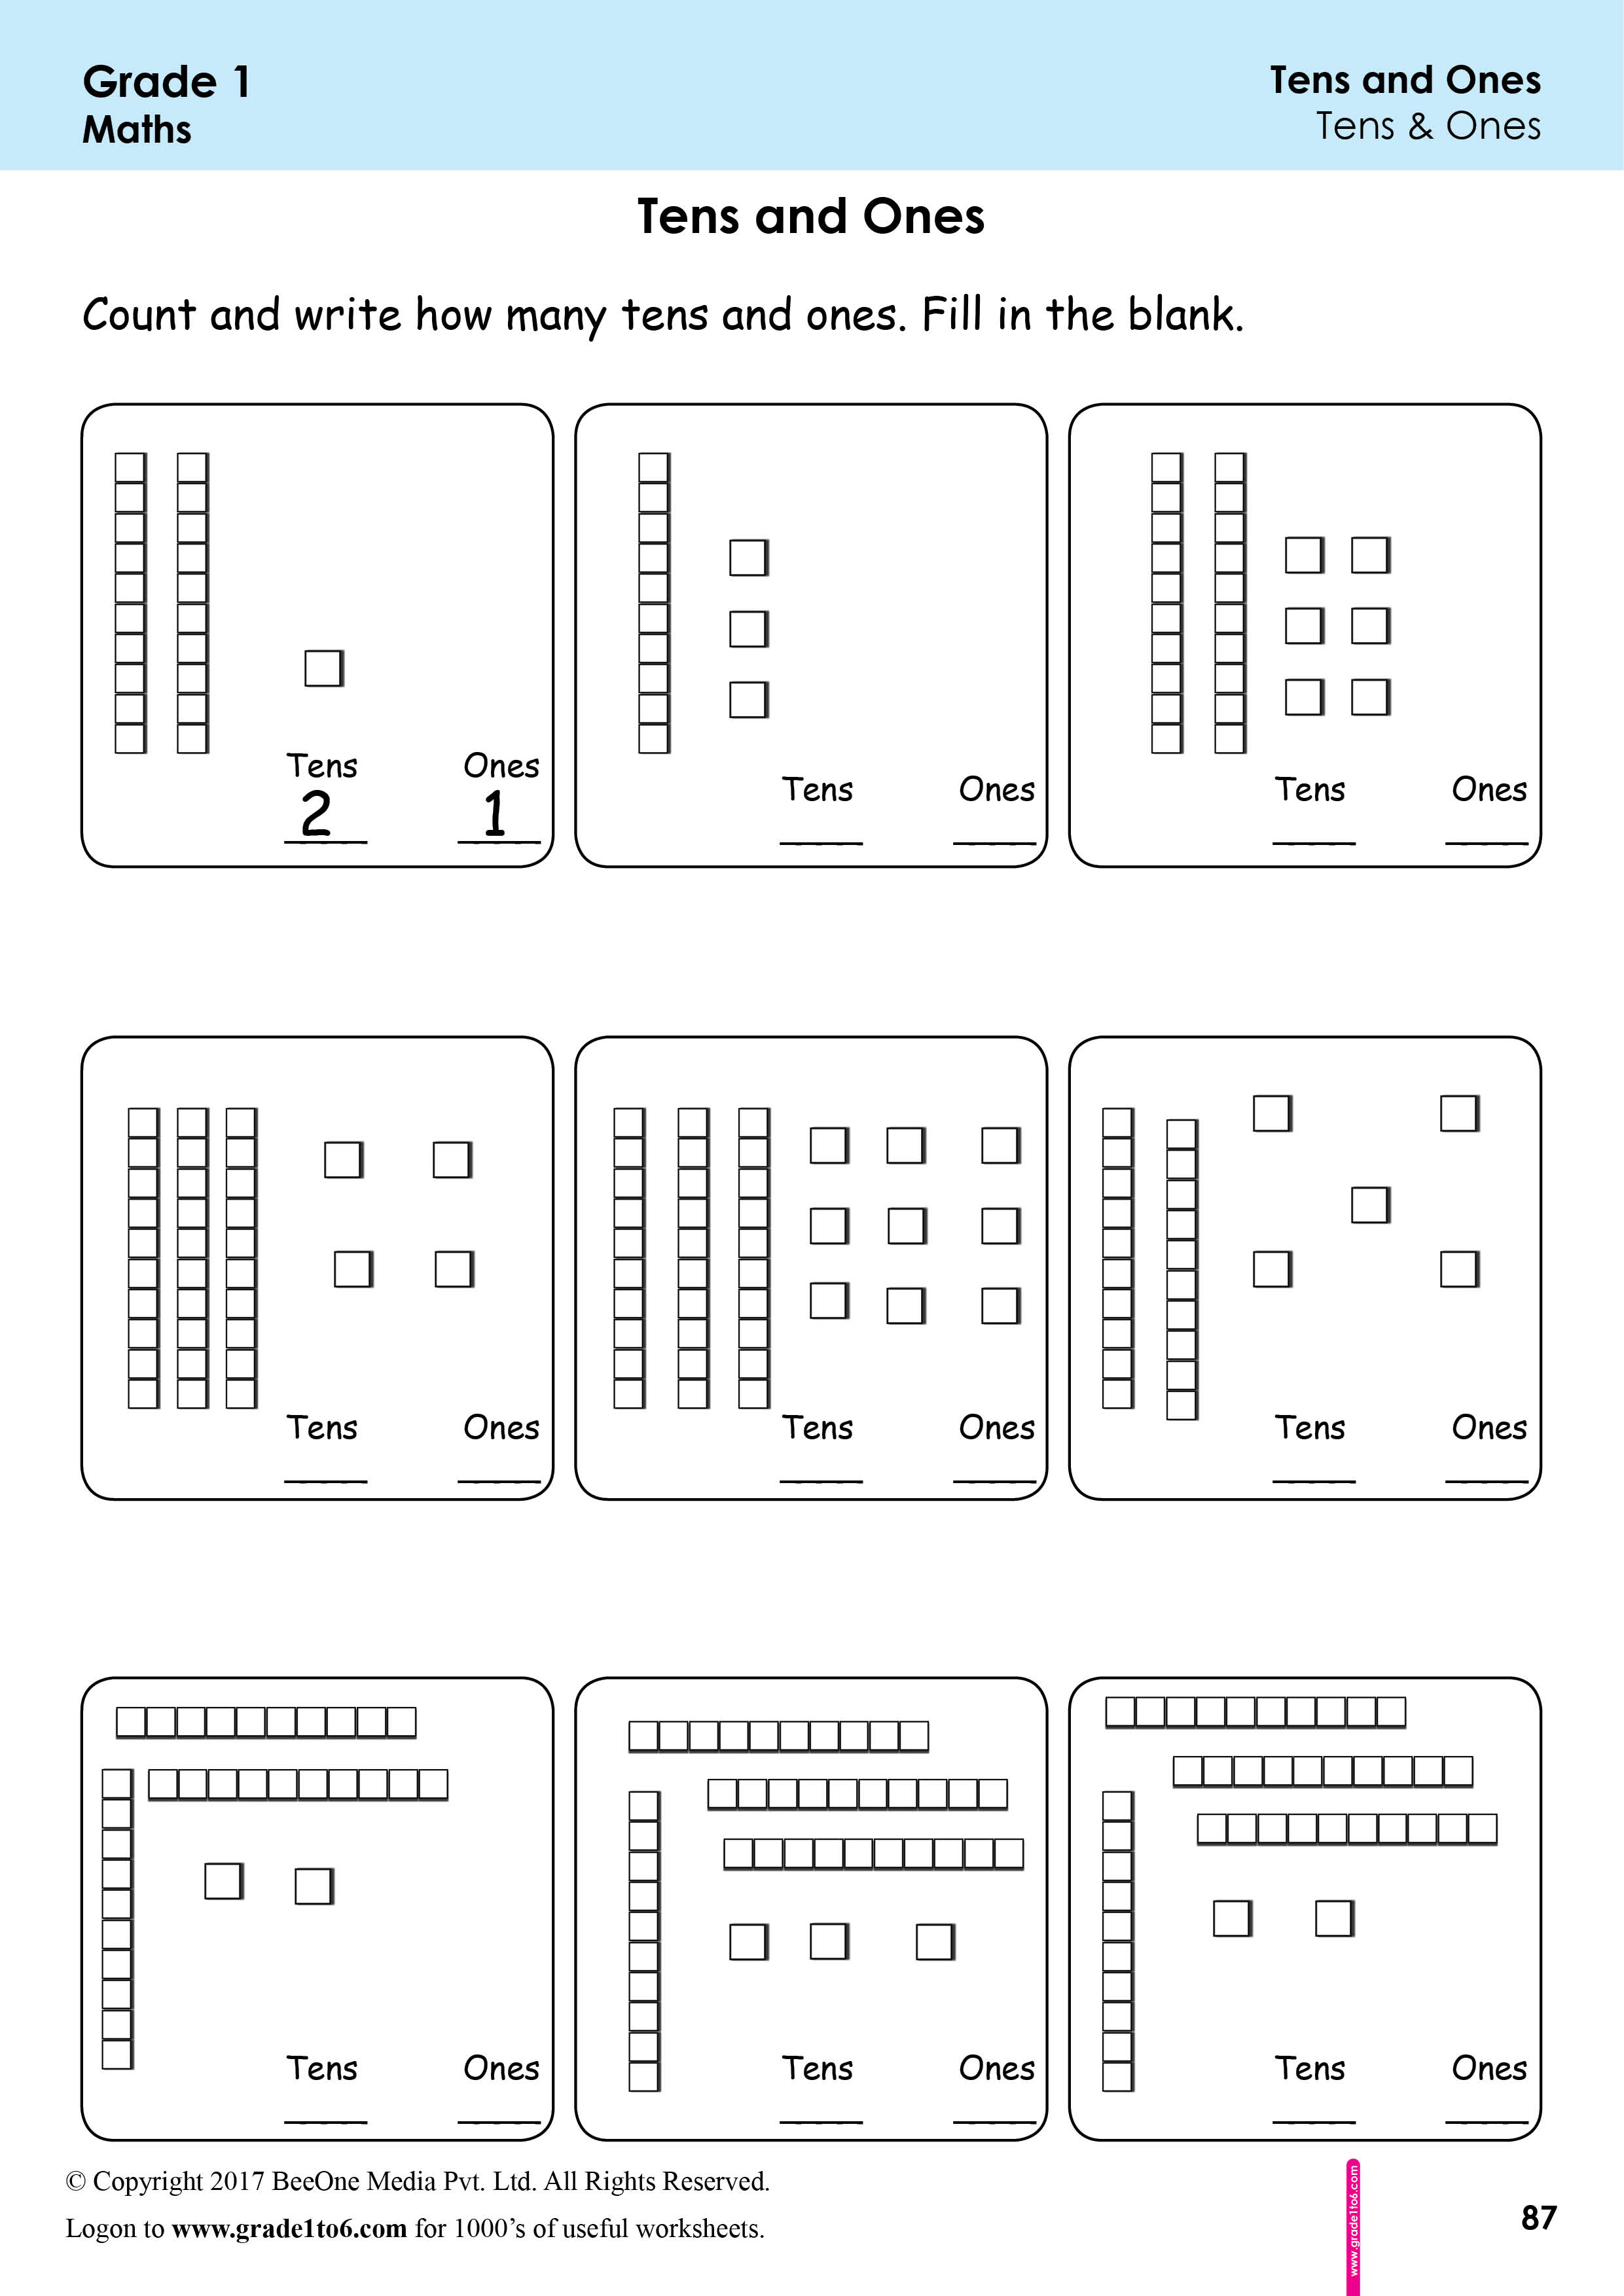 tens-and-ones-worksheet-class-1-place-value-gambaran